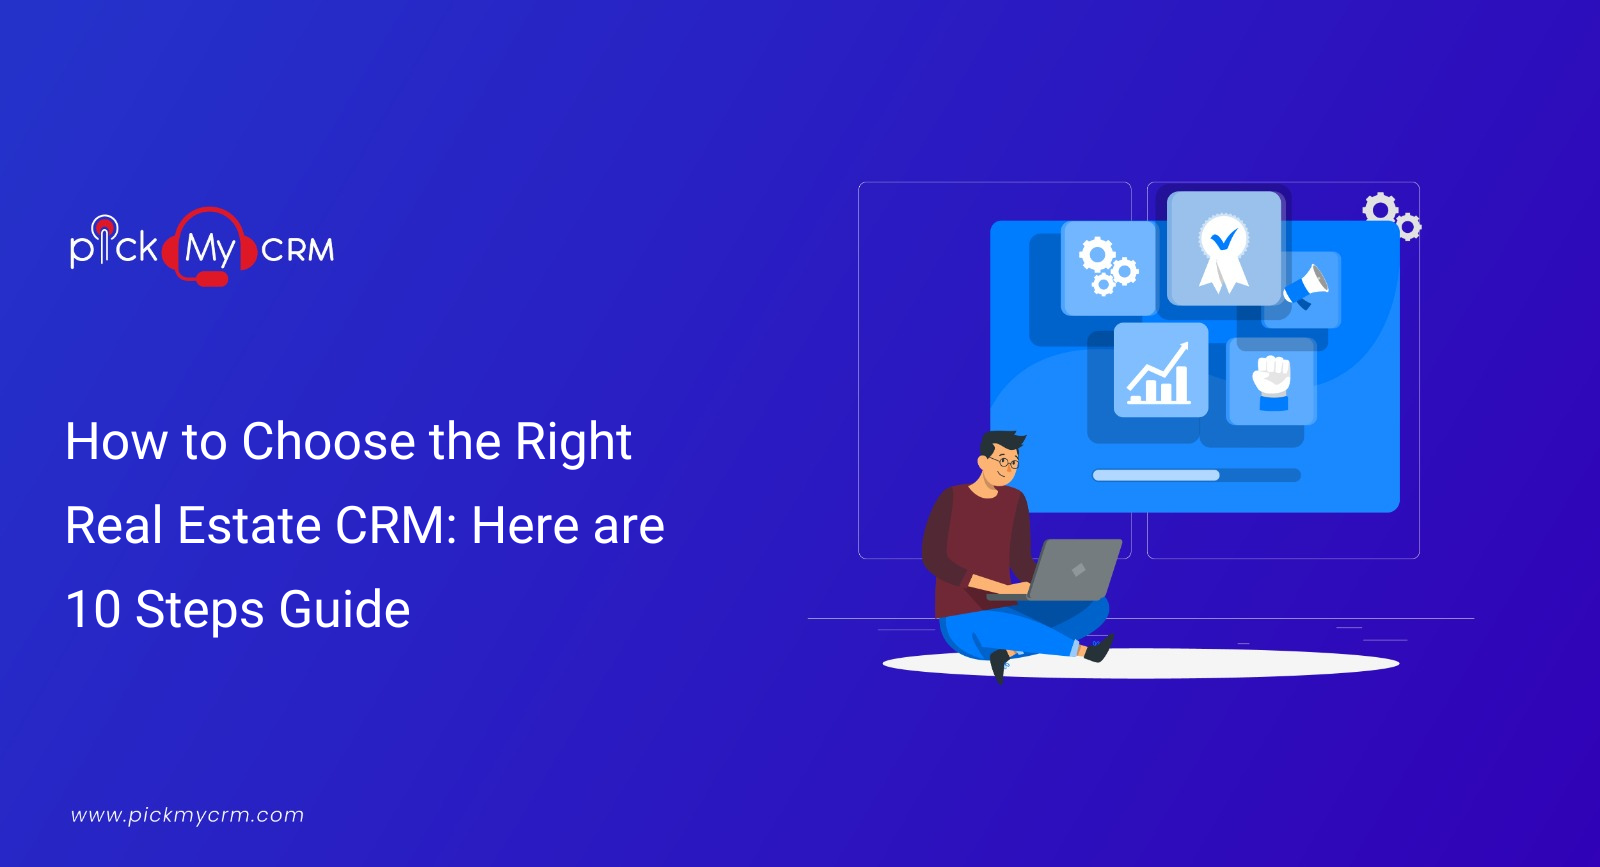 How to Choose the Right Real Estate CRM: Here are 10 Steps Guide